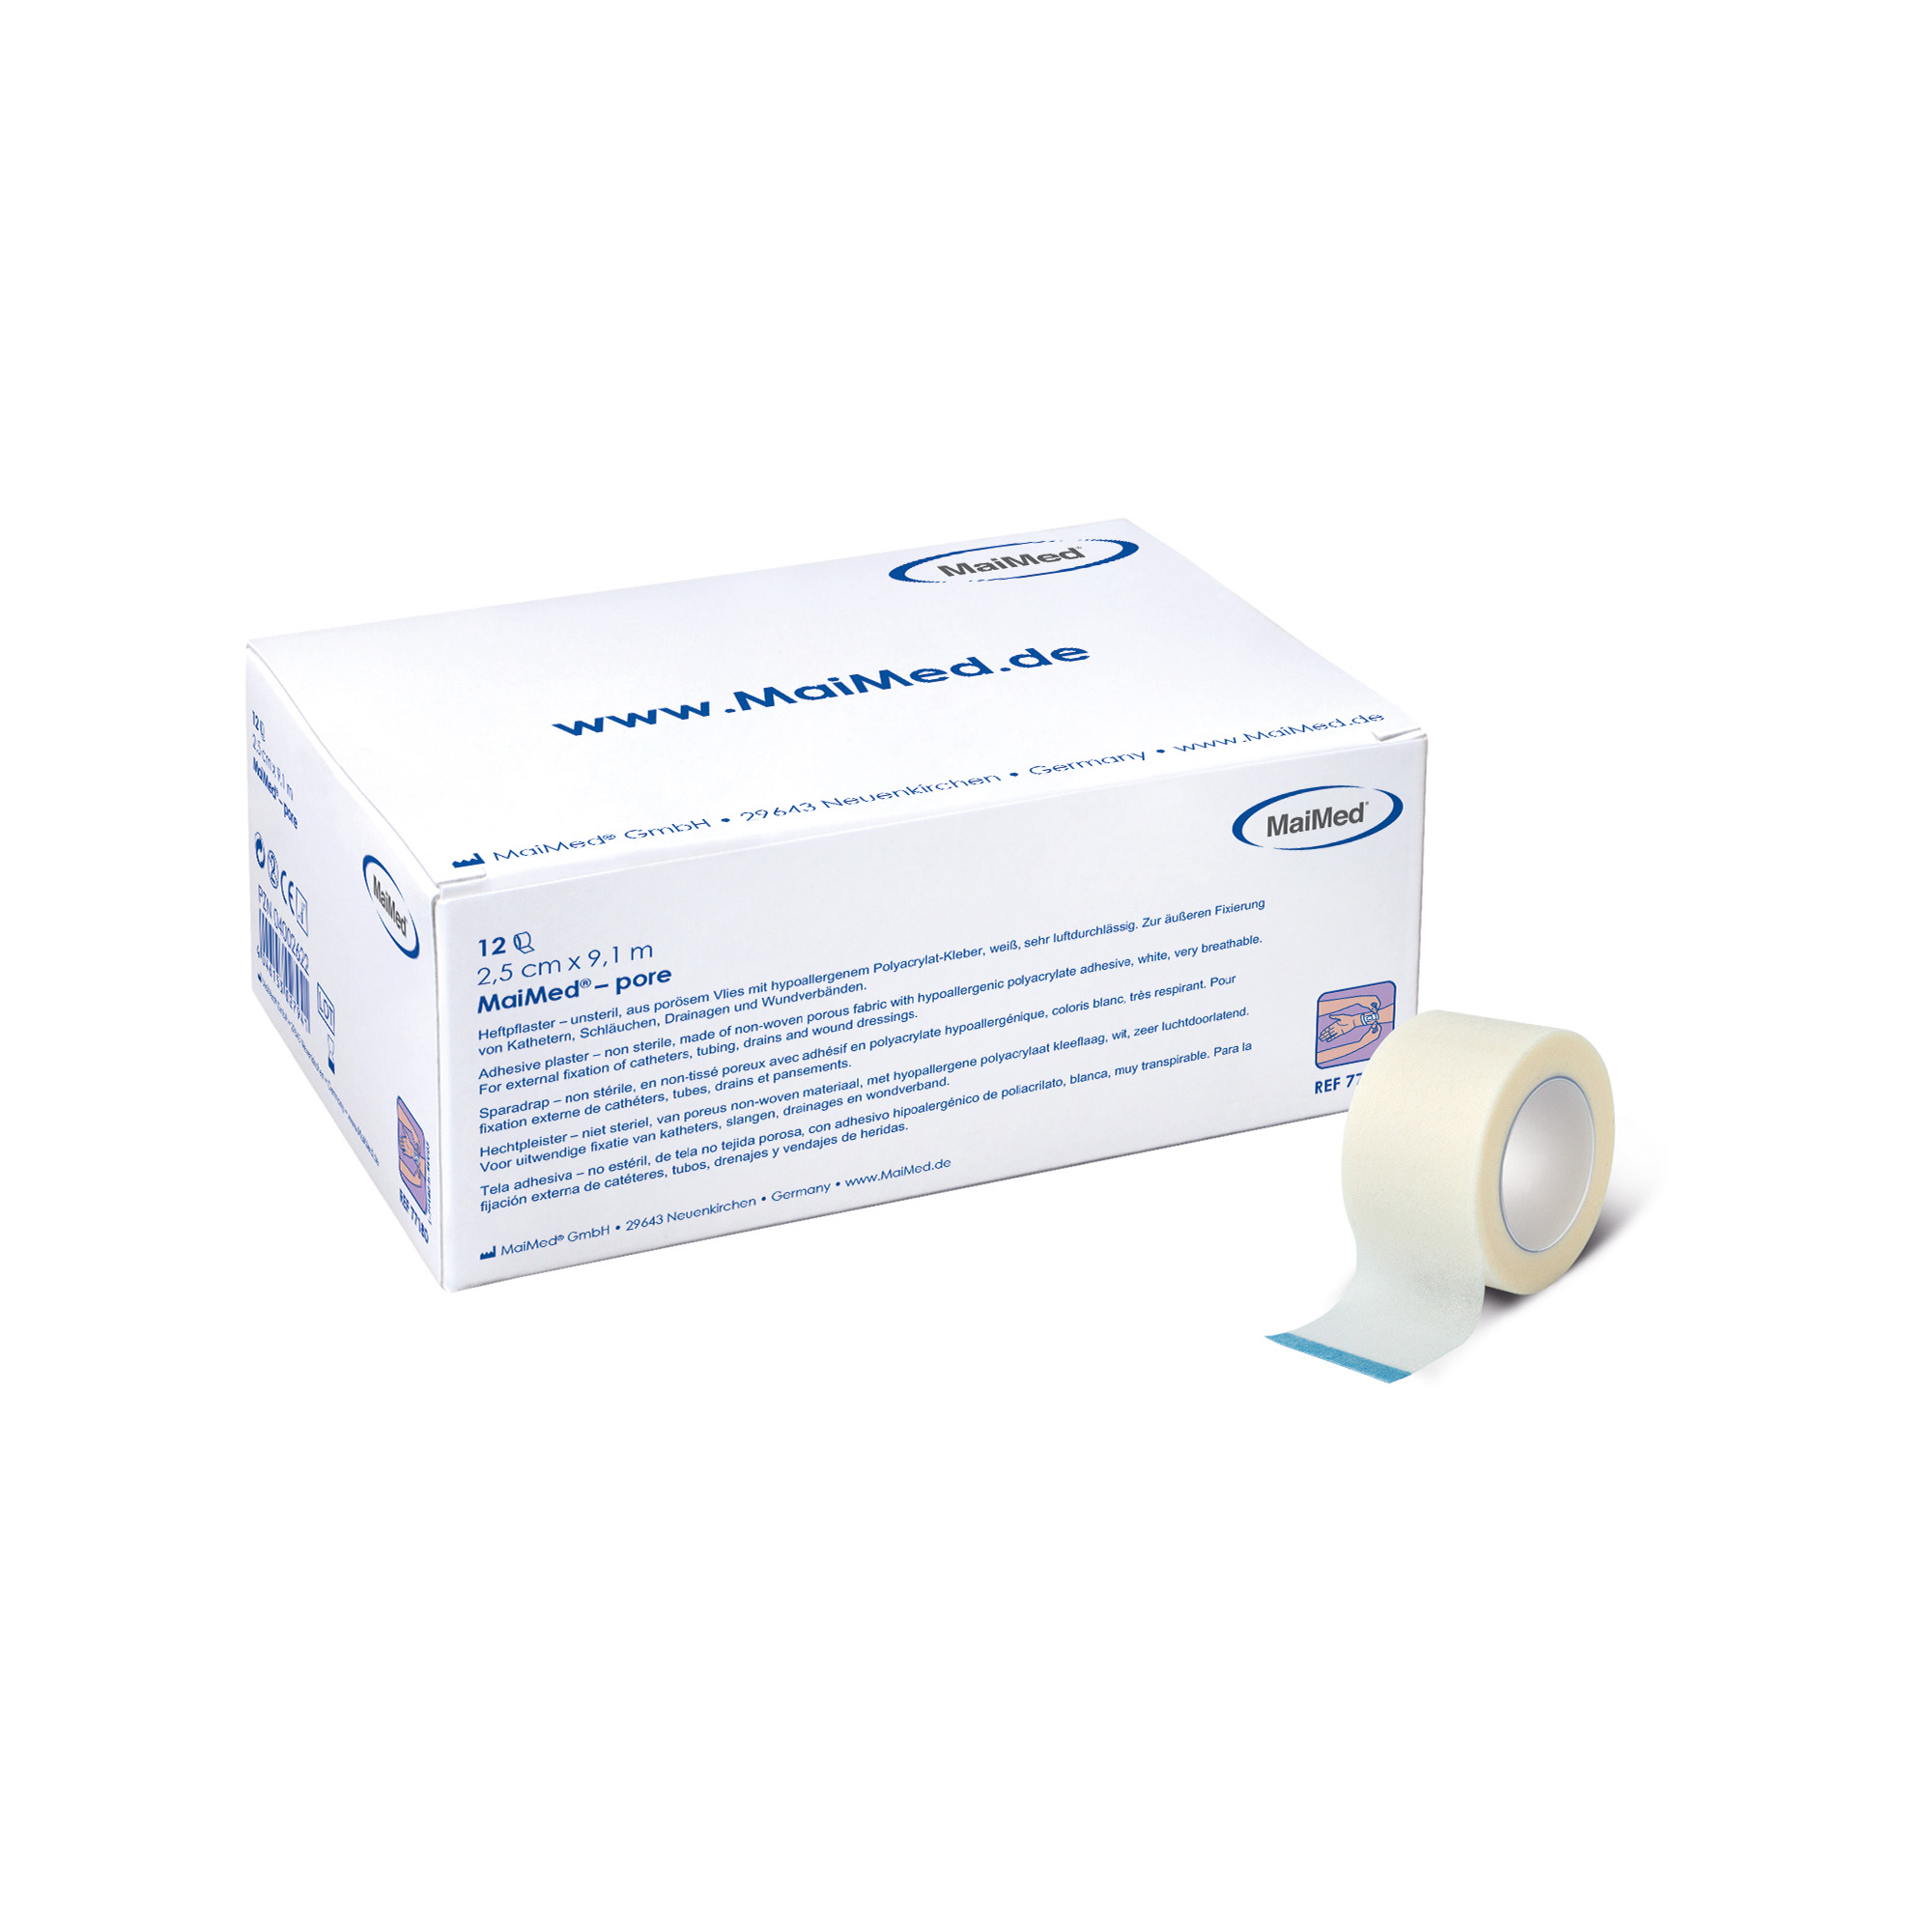 MaiMed Pore, Adhesive Plaster from Non-Woven Material, 5cmx9.1m, 6 pcs.